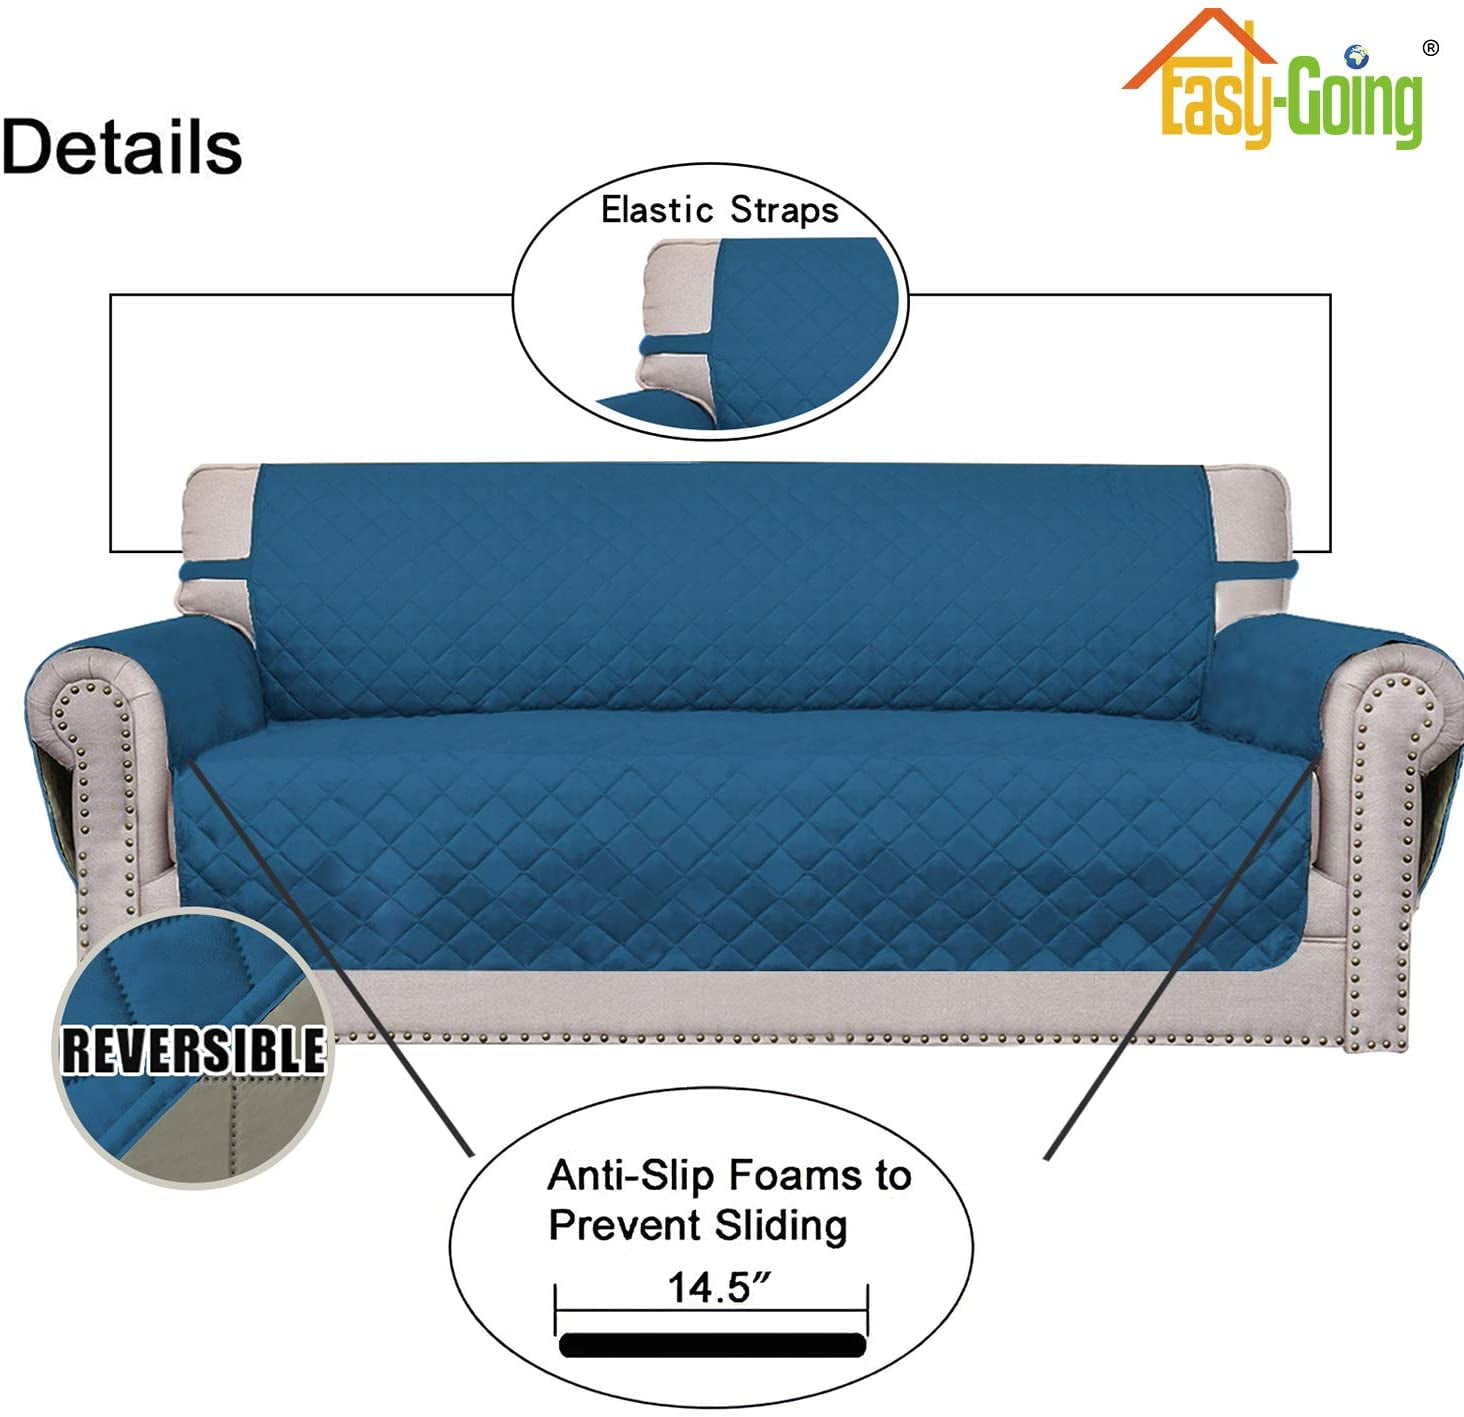 Easy-Going Reversible Sofa Slipcover Water Resistant Couch Cover, Sofa Size, Peacock Blue/Beige - 2